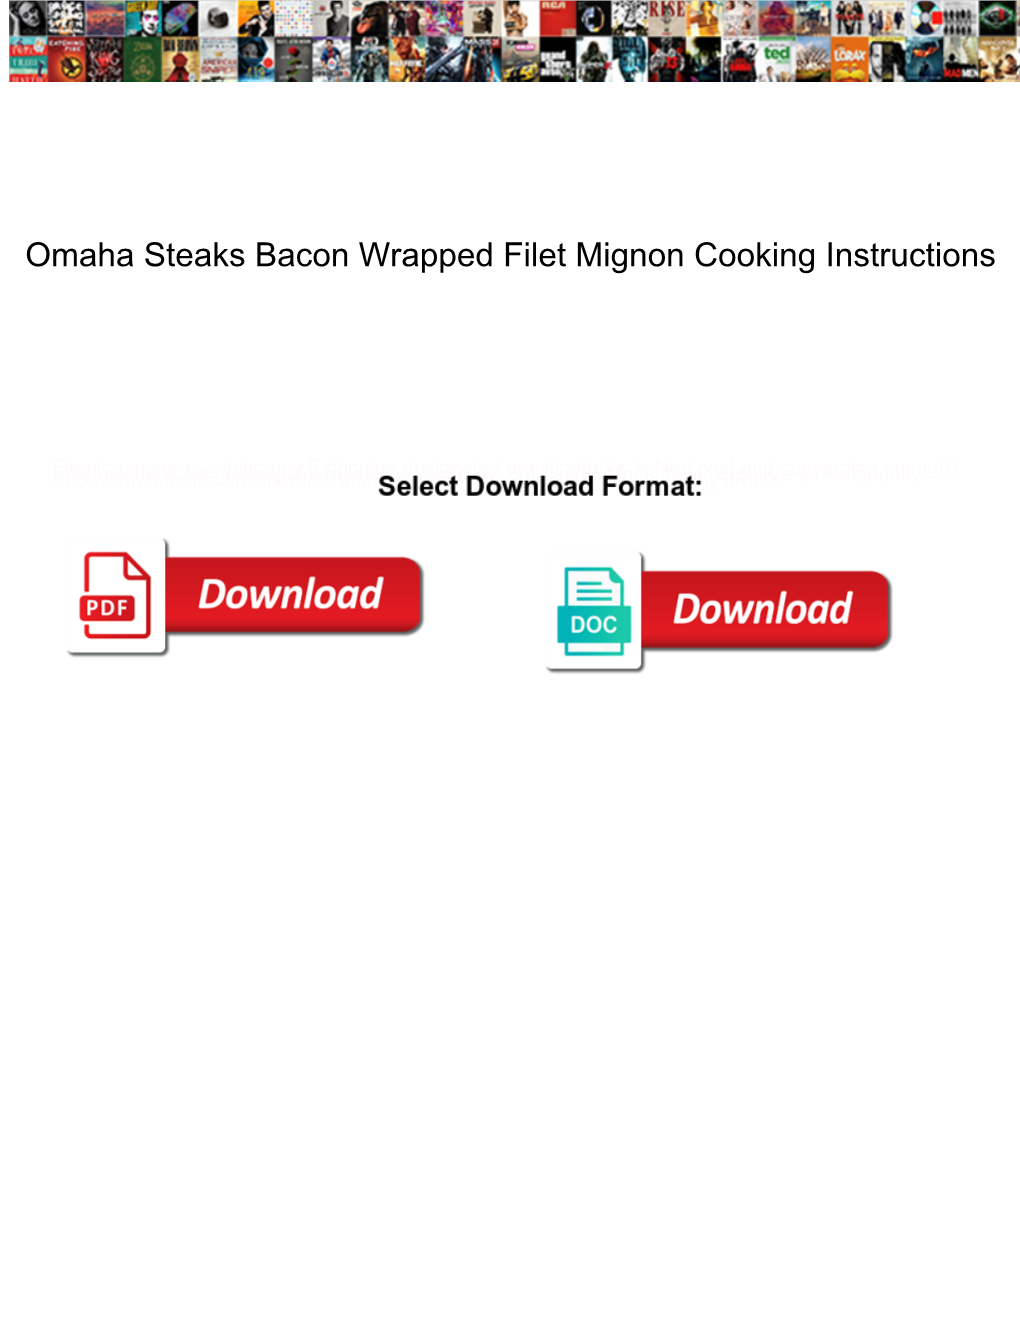 Omaha Steaks Bacon Wrapped Filet Mignon Cooking Instructions